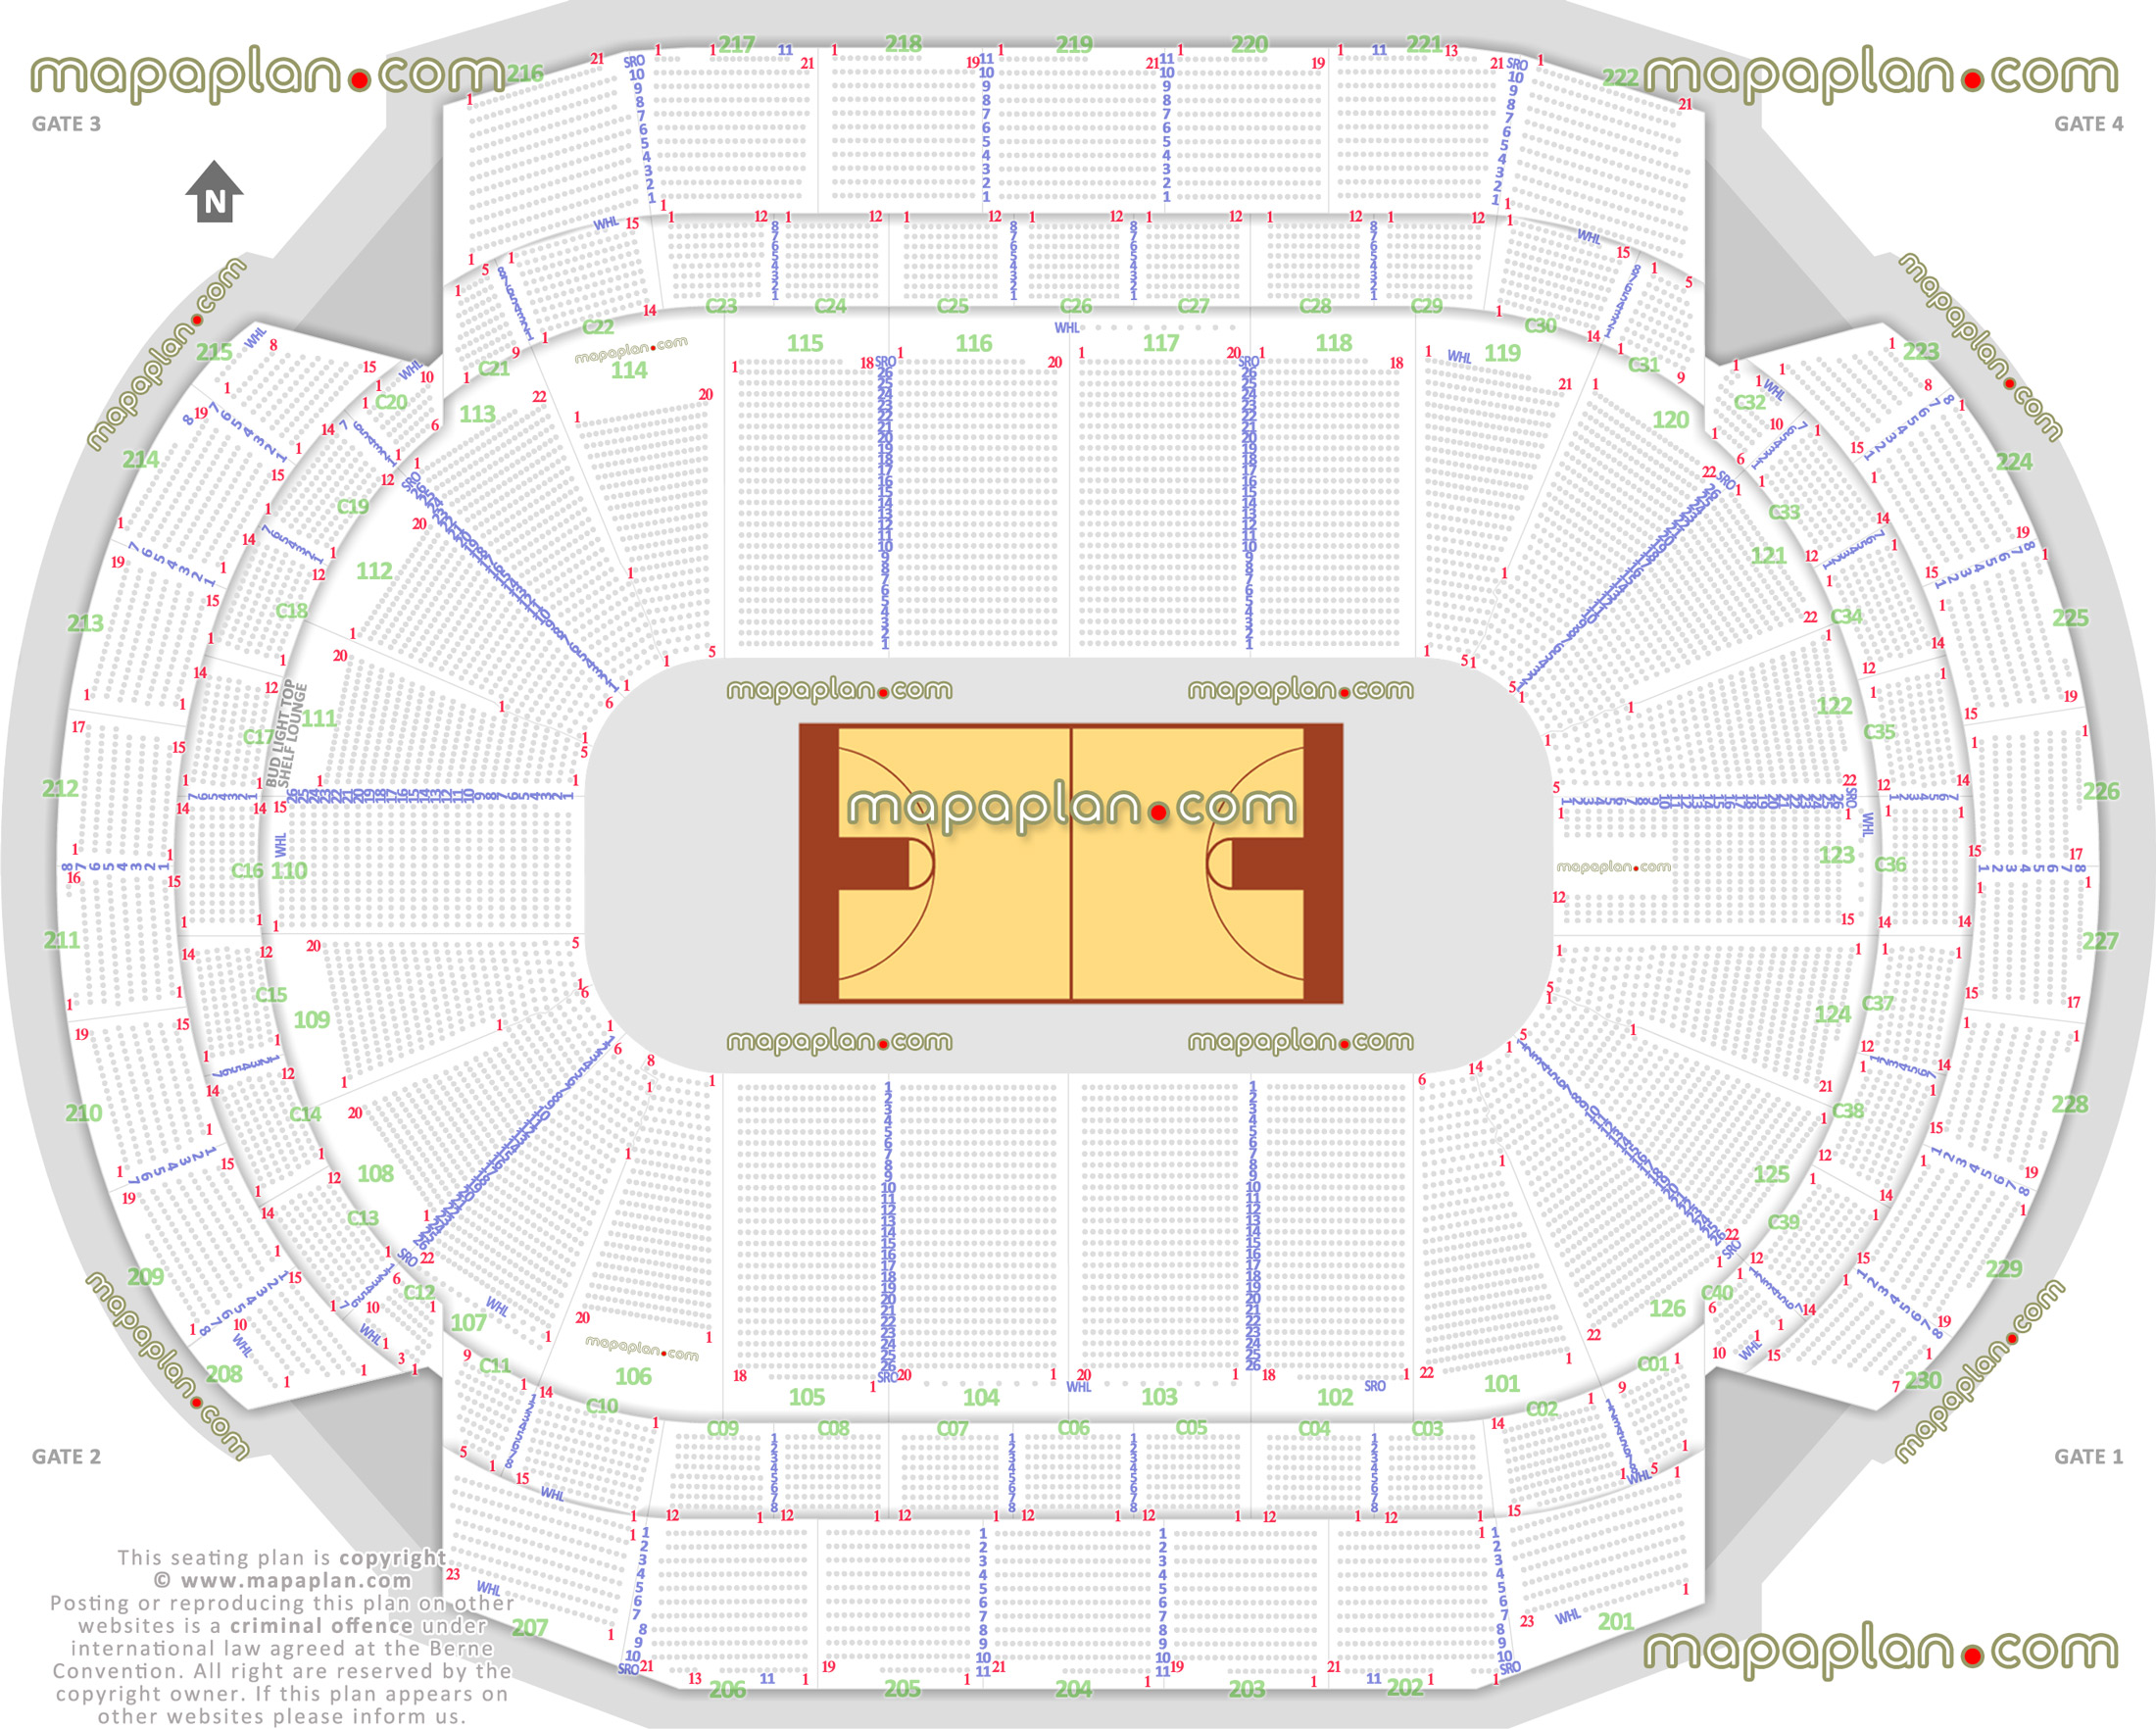 basketball games arena seating capacity arrangement diagram Xcel Energy Center arena minnesota interactive virtual 3d detailed layout glass rinkside lower upper level stadium bowl sections full exact row numbers plan seats row lower upper level sections Saint Paul Xcel Energy Center seating chart